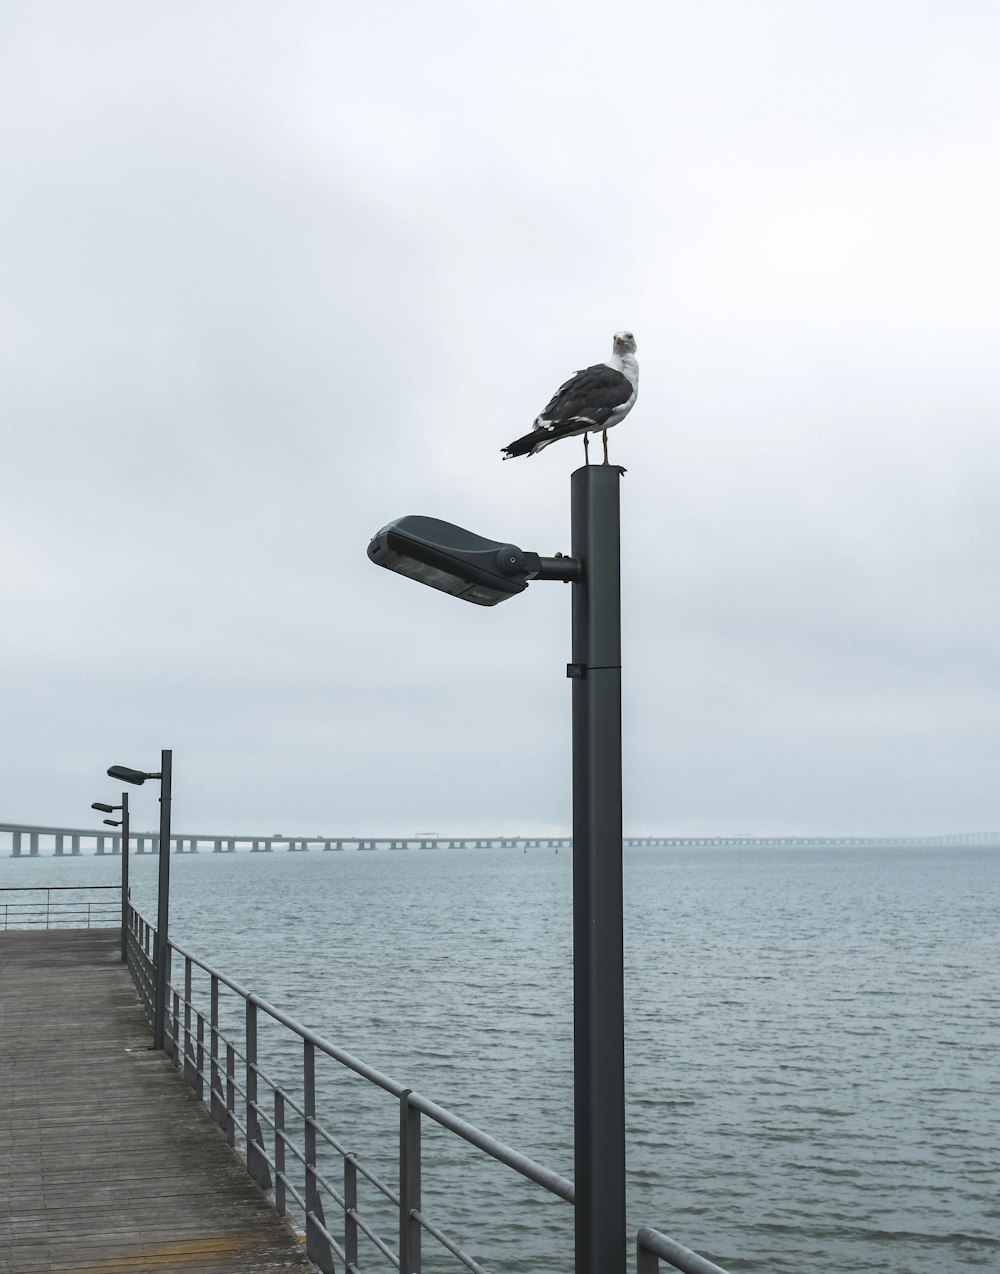 a seagull sitting on top of a street light next to the ocean